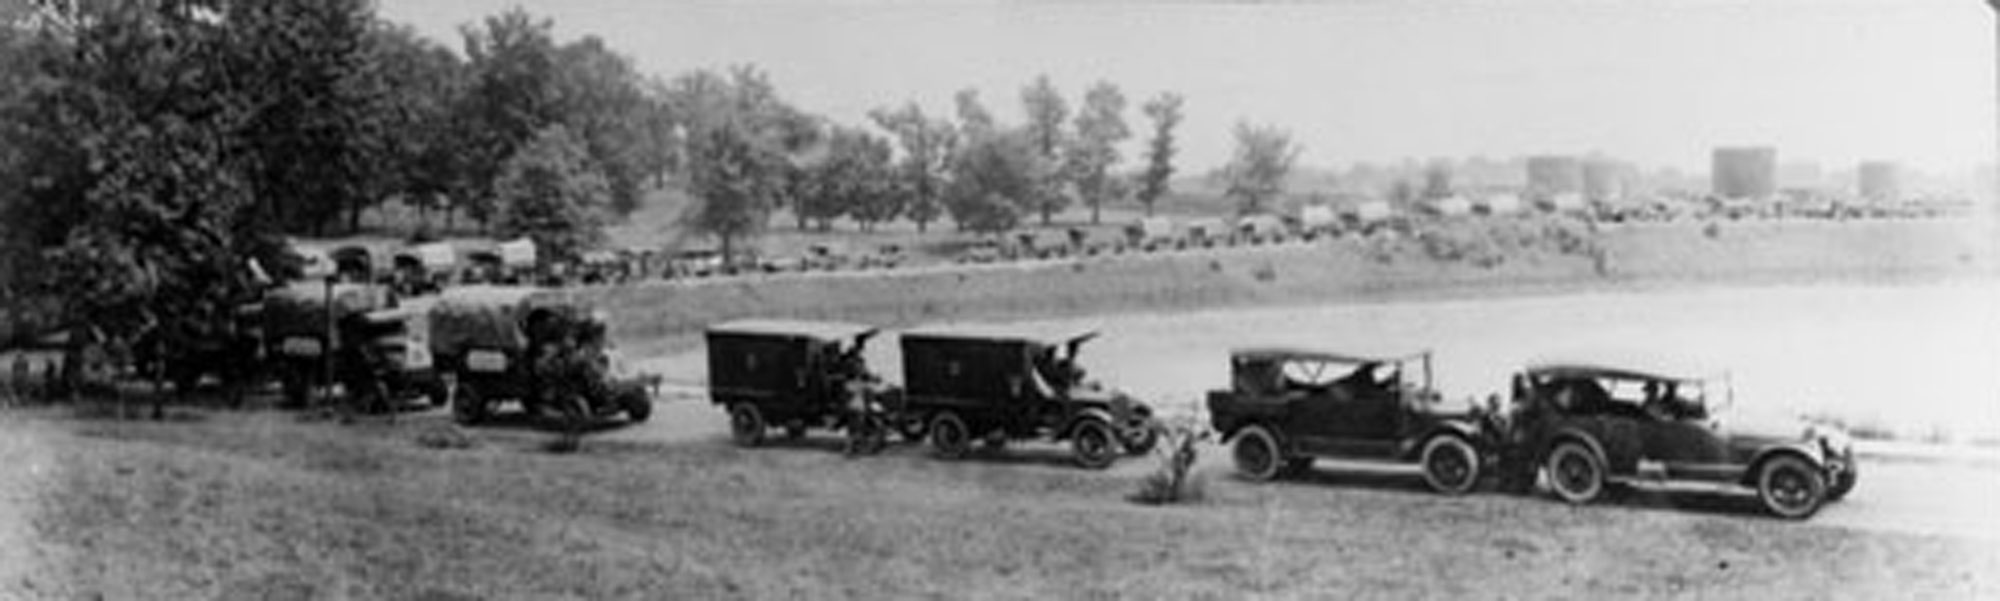 Image of the First Mortor Transport Convoy after WWI